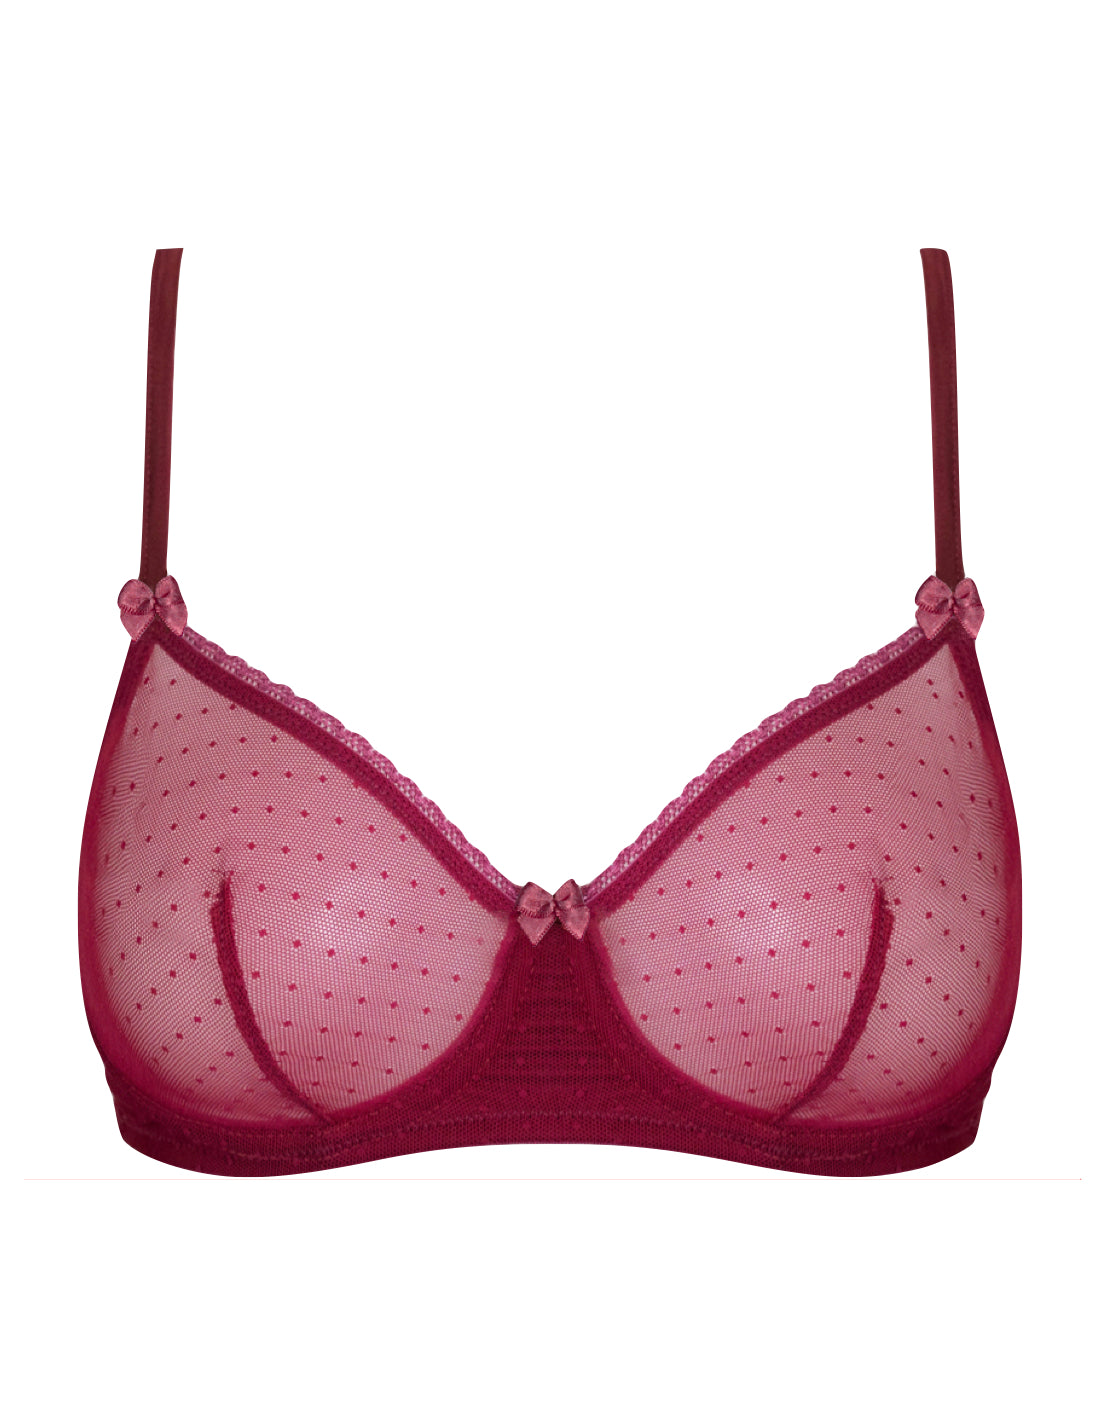 IFG - Our Luxury 02 bra is immensely comfortable and